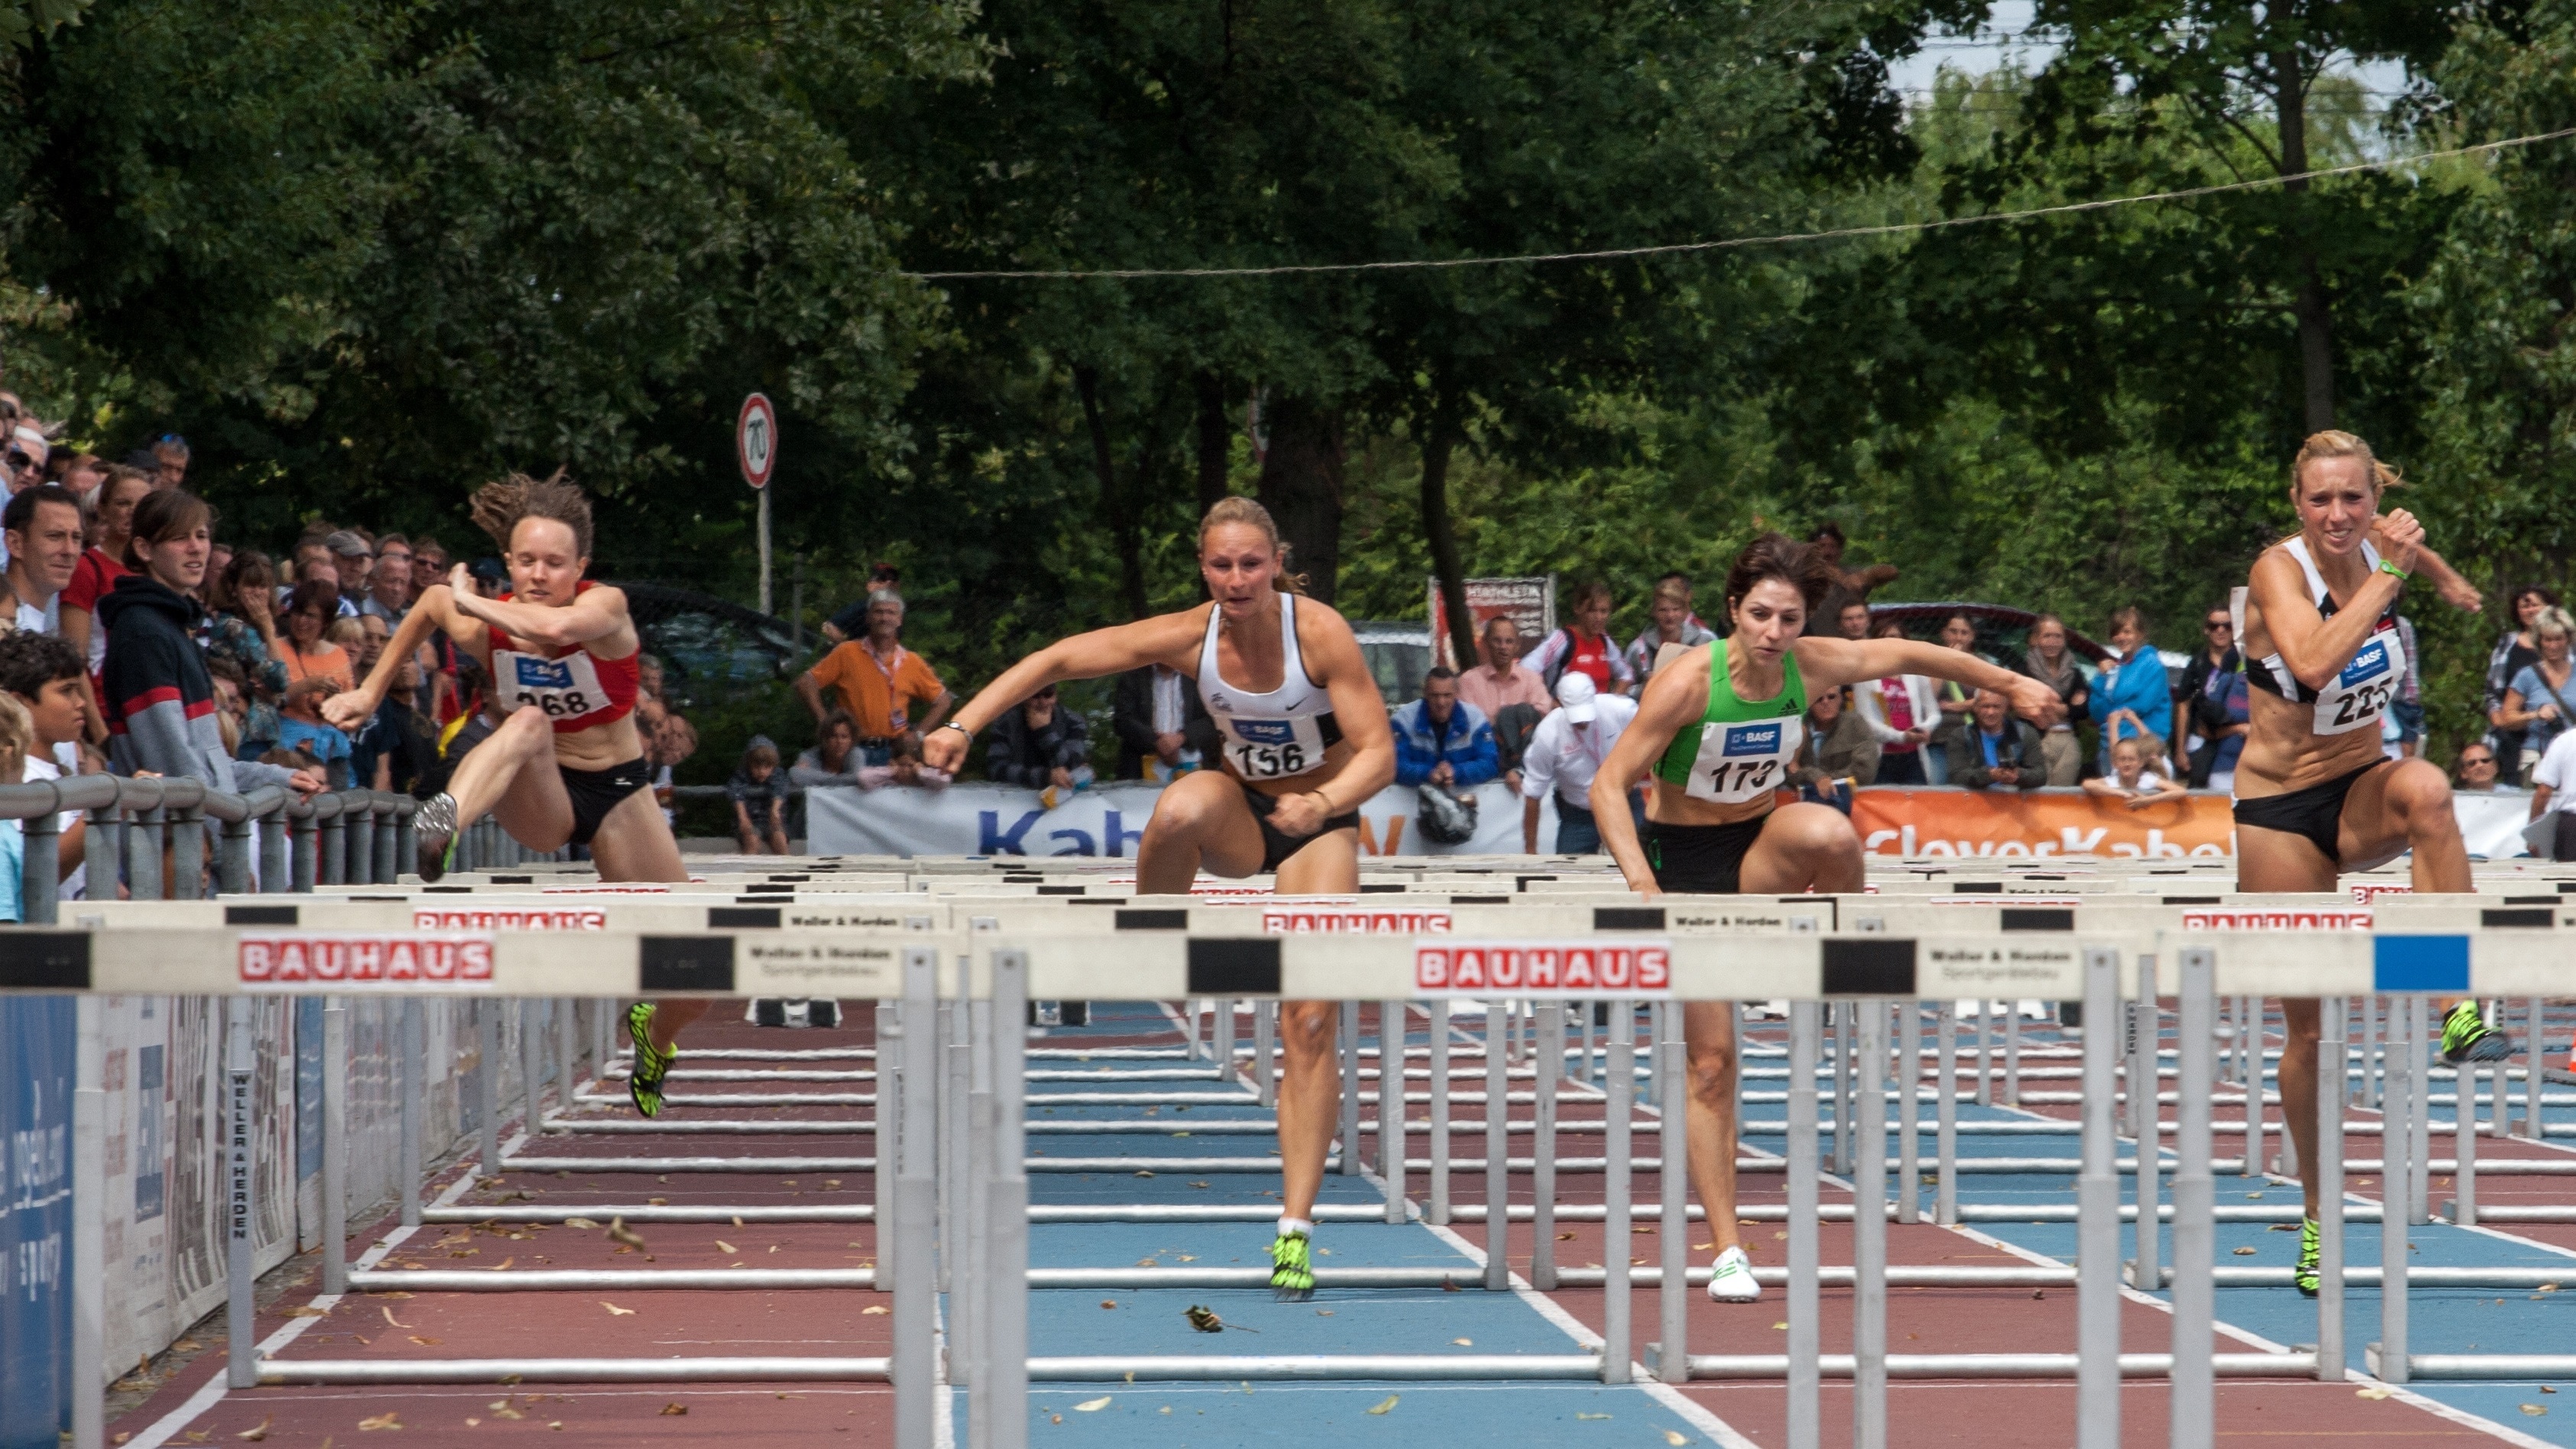 Hurdling: 100 meters hurdles, Track and field athletics, Running competition, Hurdle race. 3370x1900 HD Wallpaper.